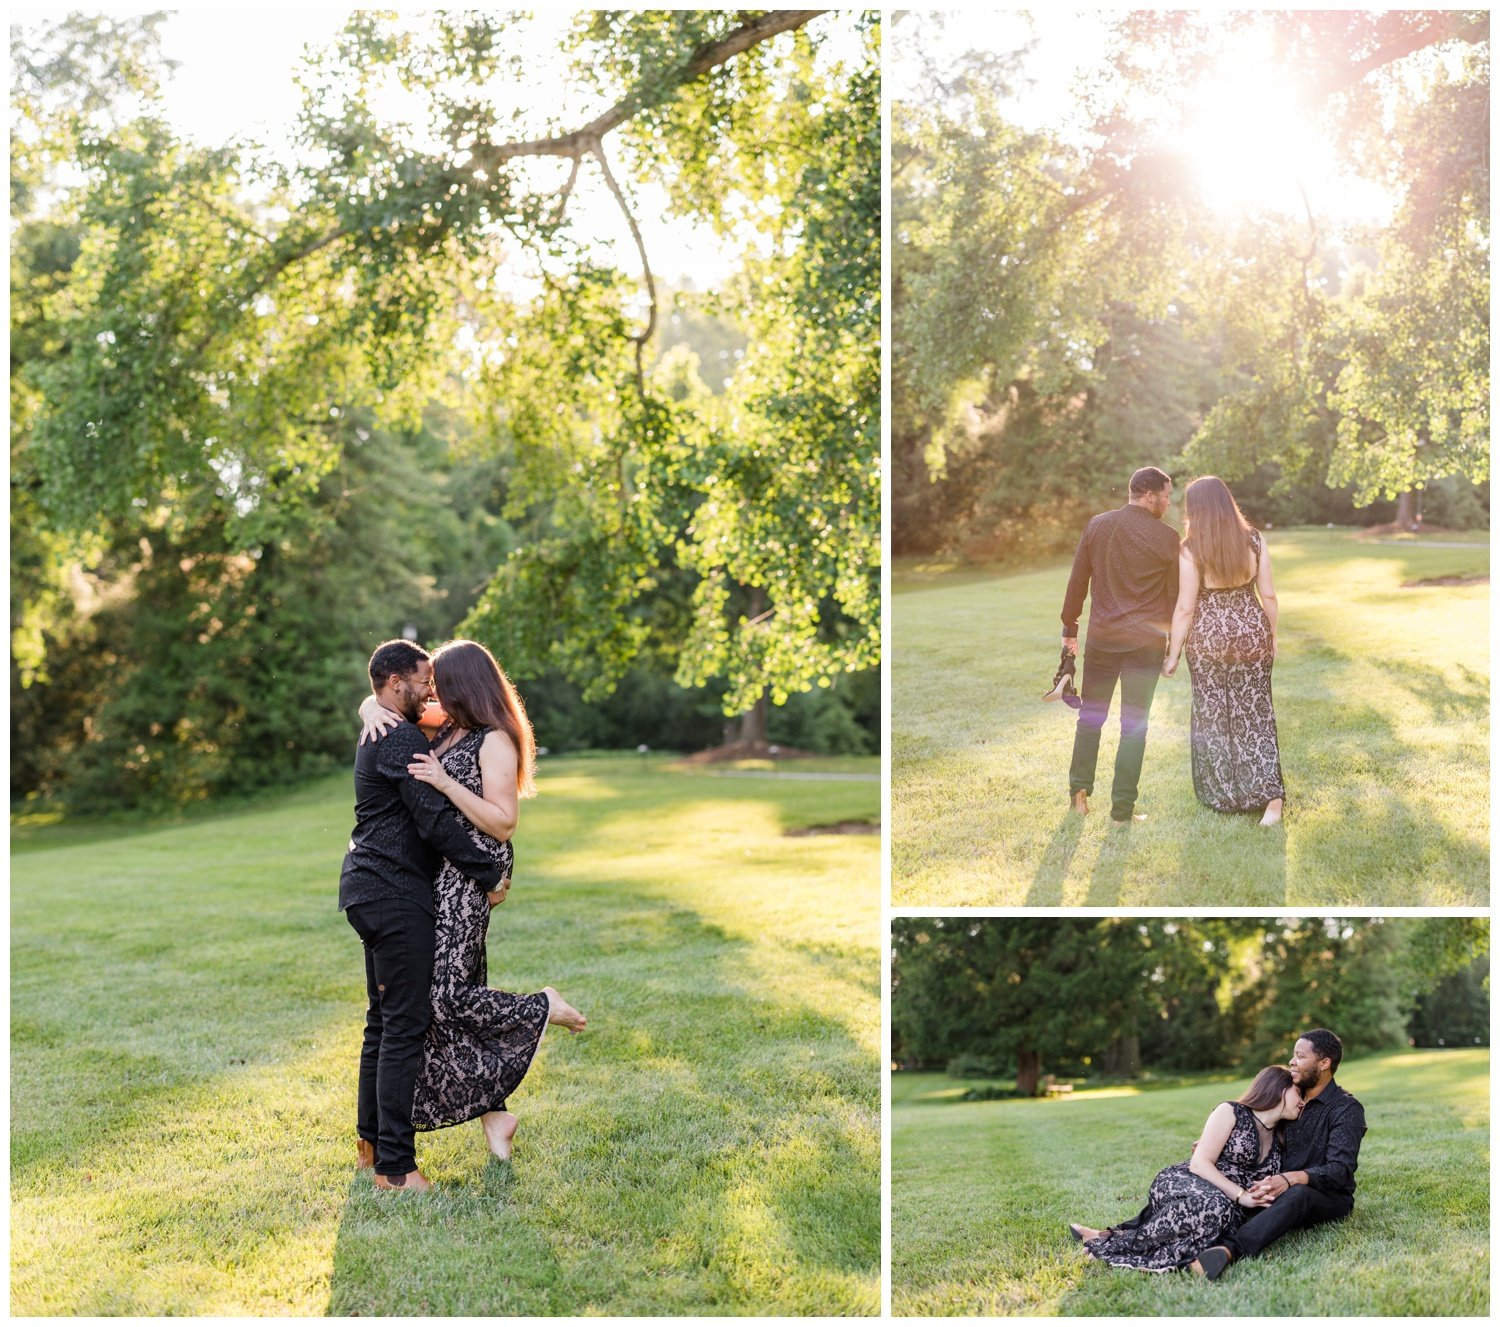 Queer-Photographers-East-Coast-Longwood-Gardens-Engagement-Session-LGBTQ-4